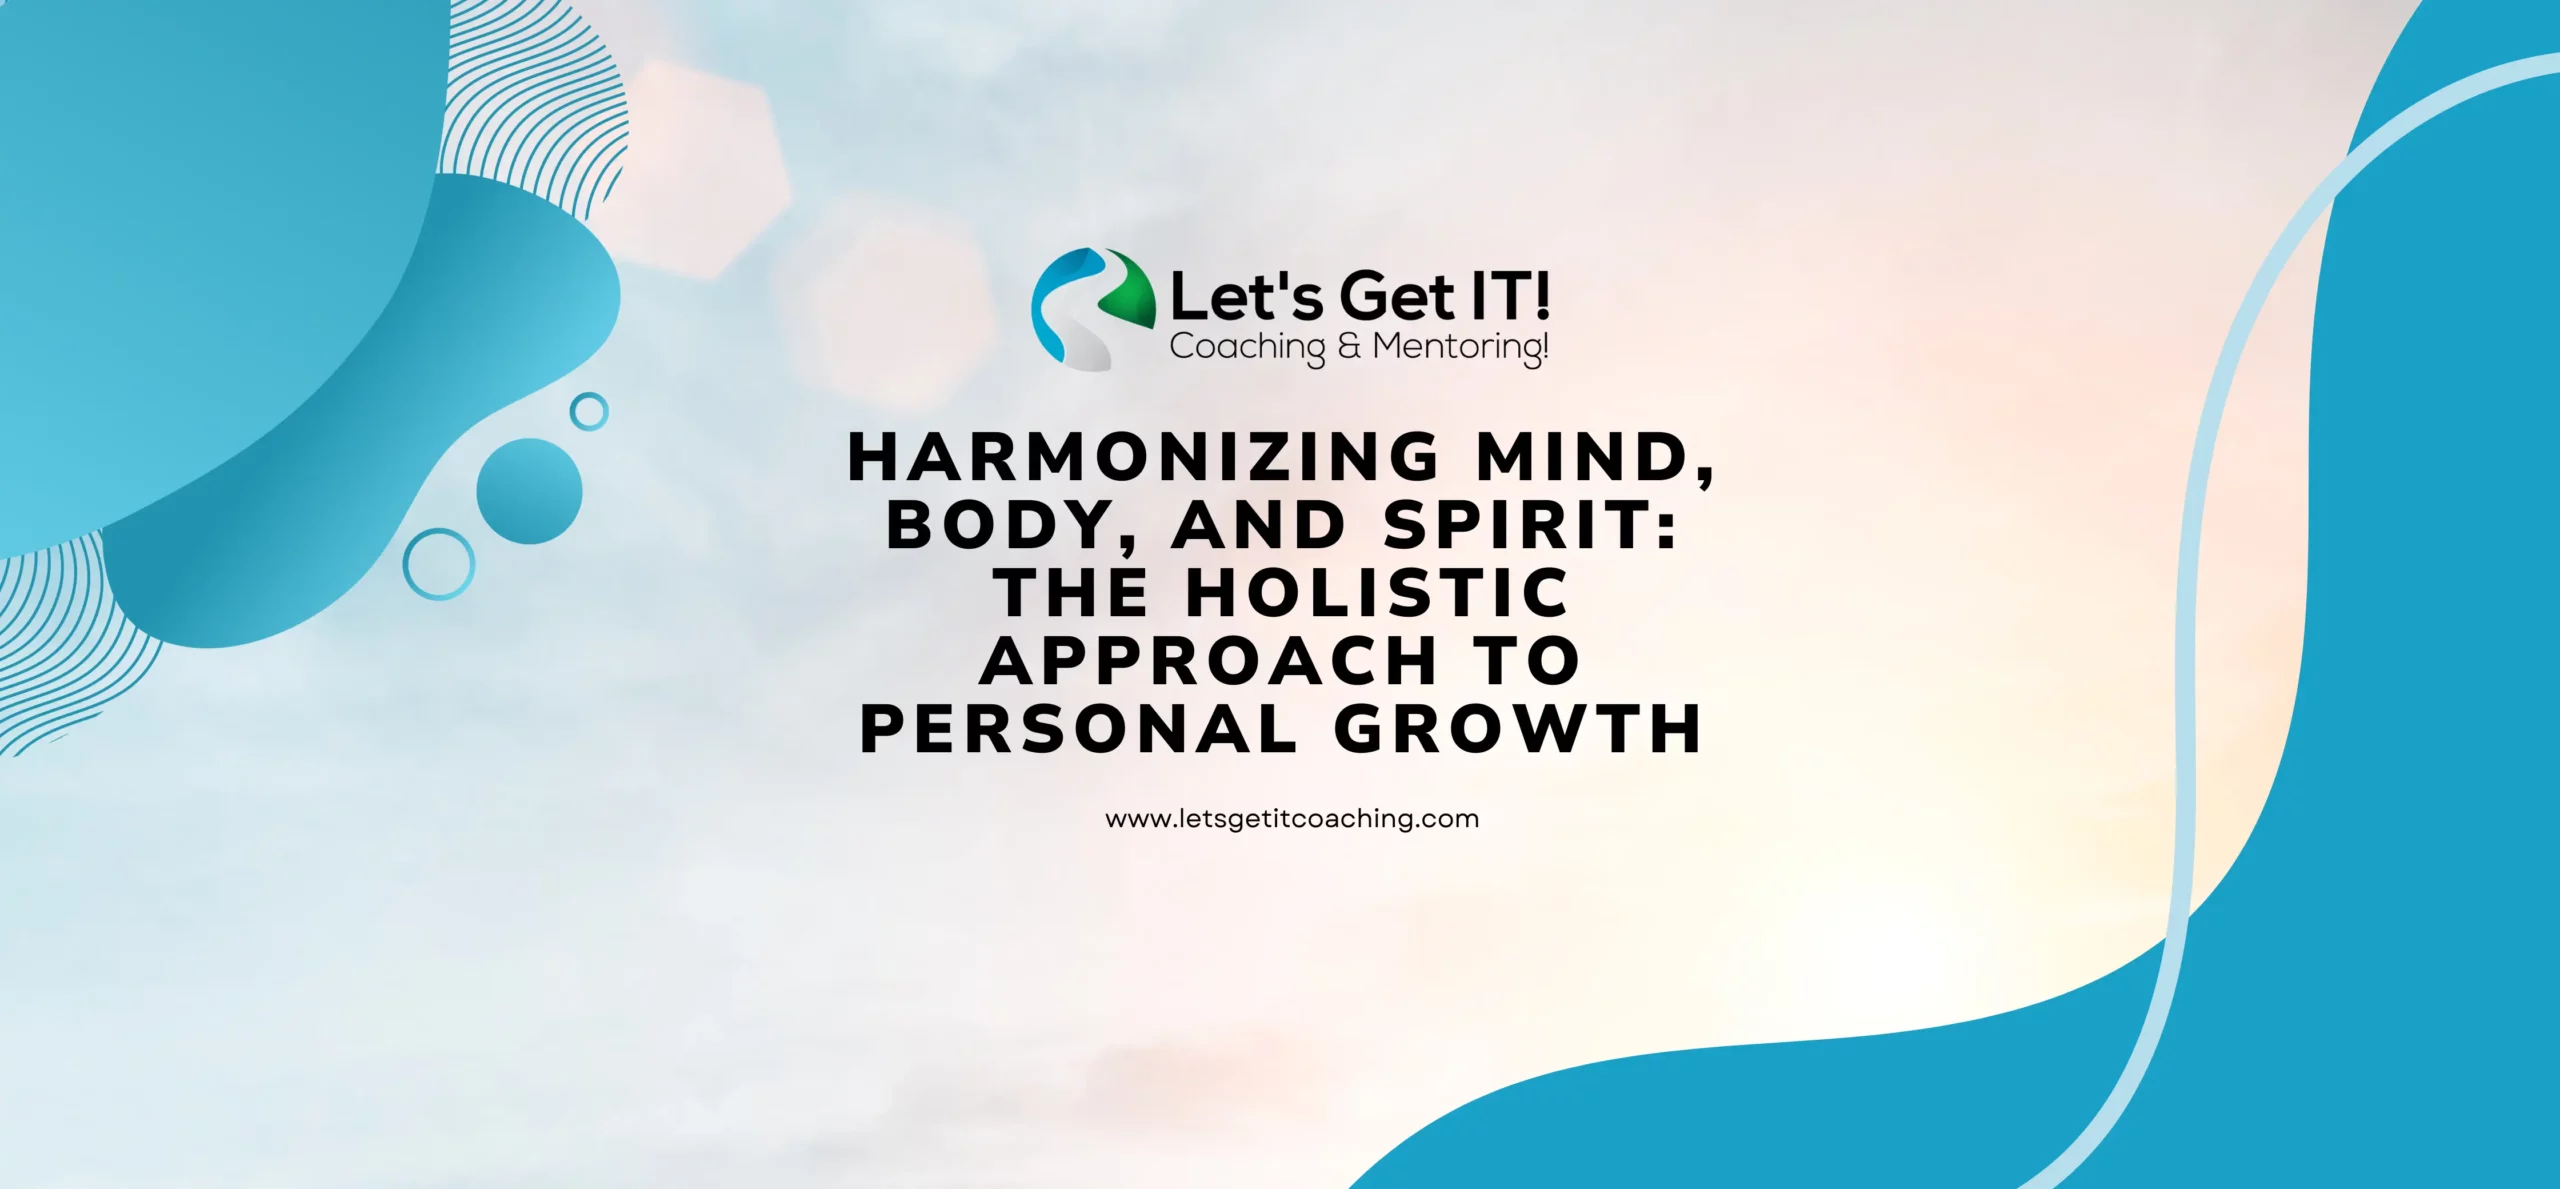 Harmonizing Mind, Body, and Spirit: The Holistic Approach to Personal Growth